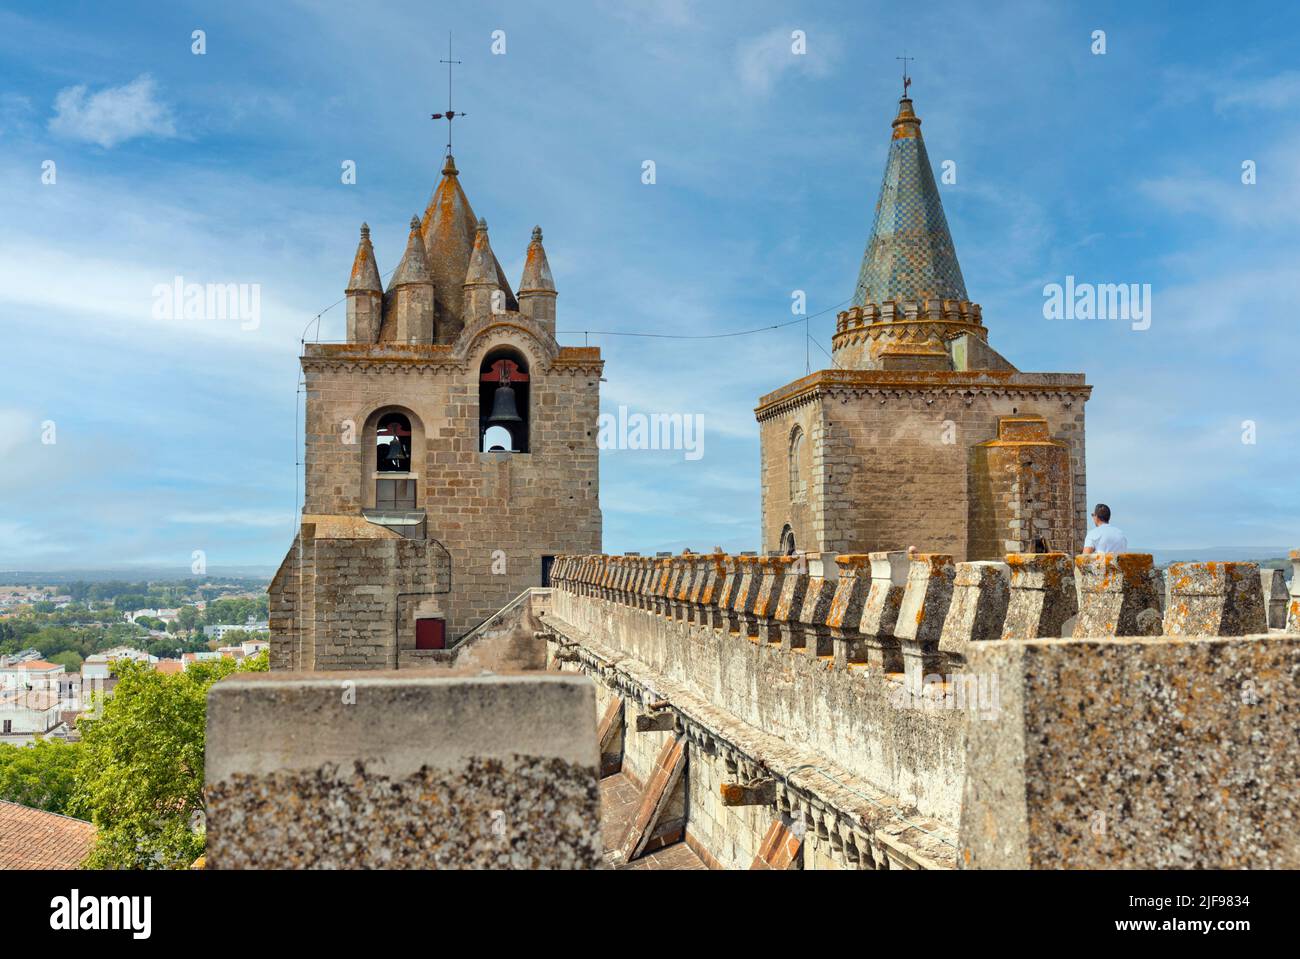 Views from rooftop of Evora cathedral, built between the 12th and 18th centuries in Romanesque, Gothic, Manueline and Baroque architectural styles.  E Stock Photo